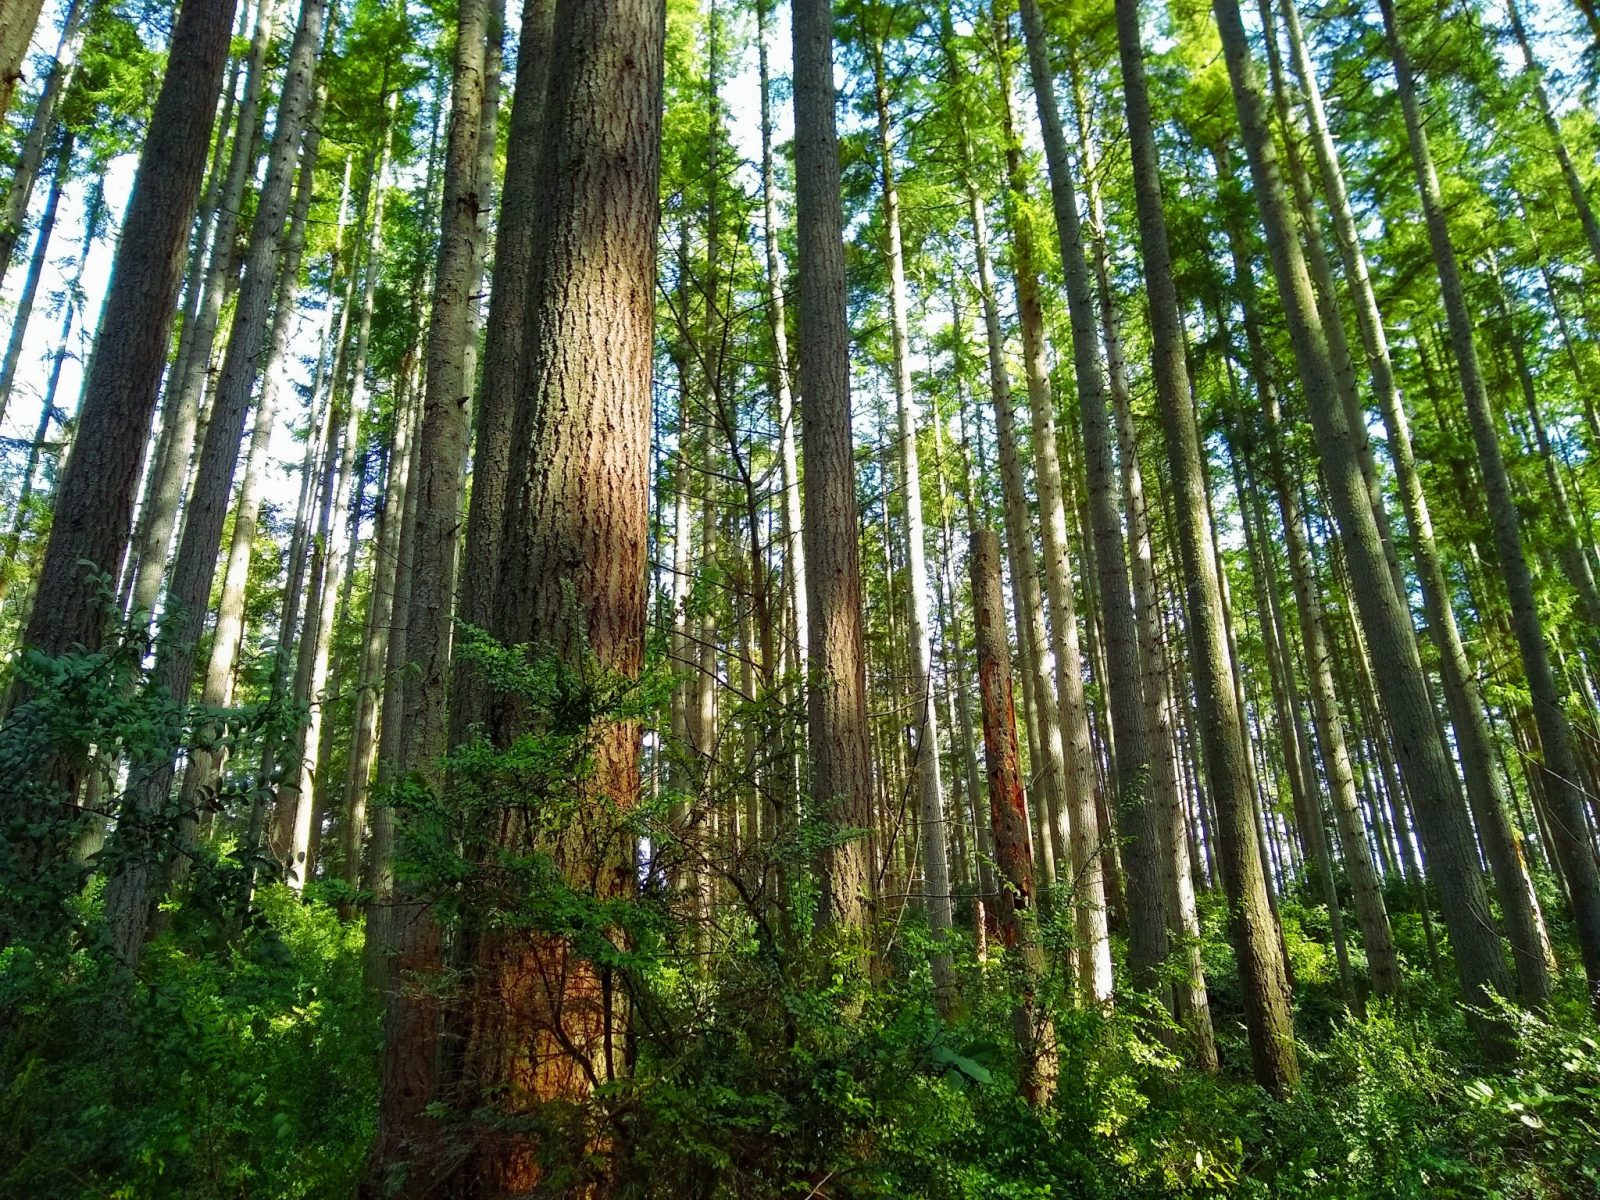 A second growth forest in Island Center Forest, a Vashon Island hiking, biking and horse trail. The trees are straight and tall and have green foliage.